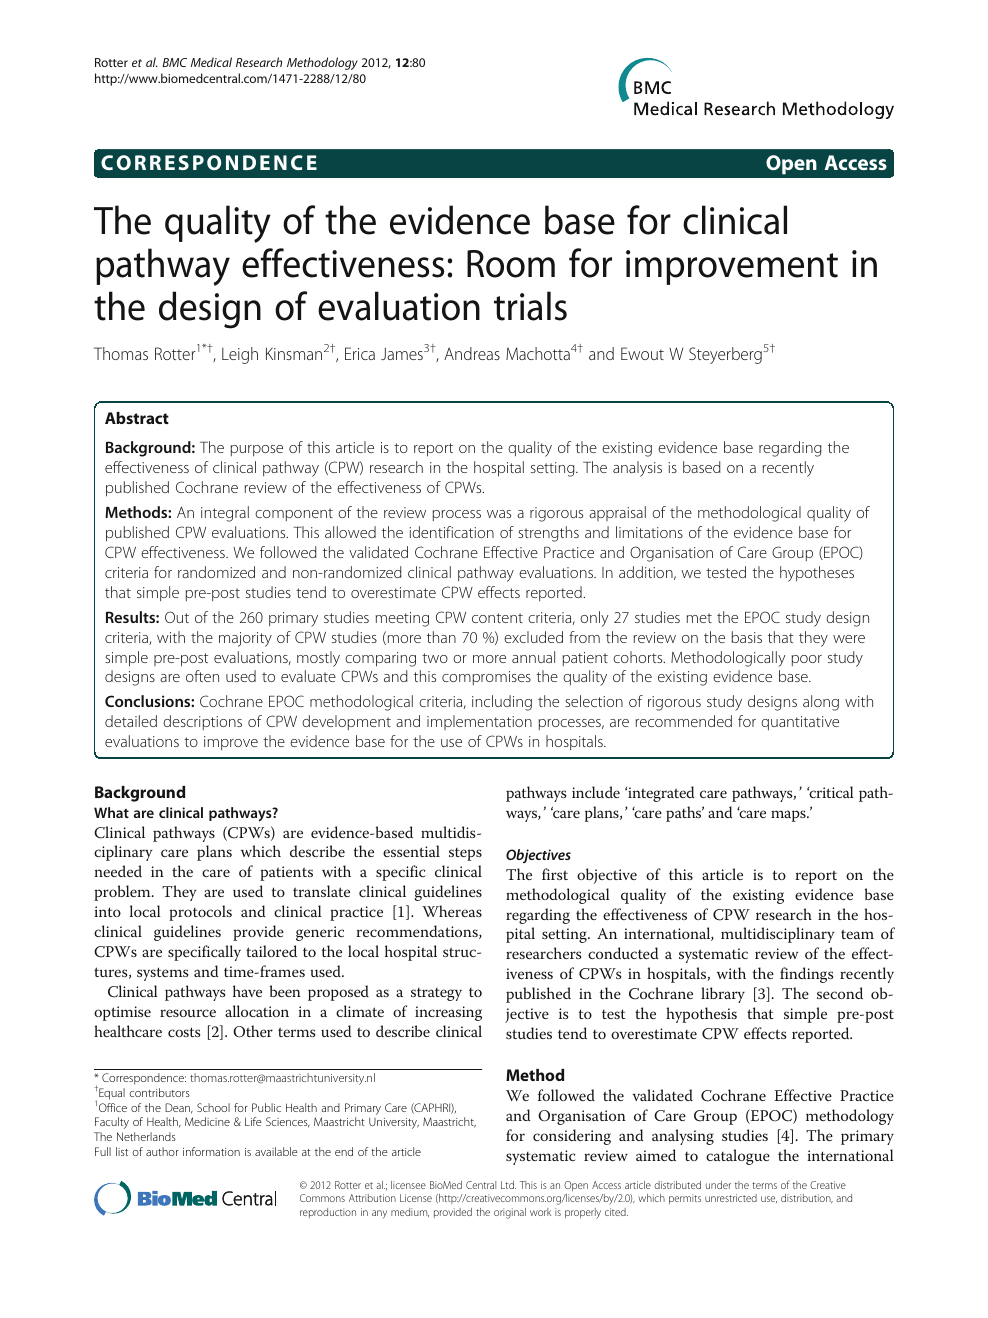 The quality of the evidence base for clinical pathway